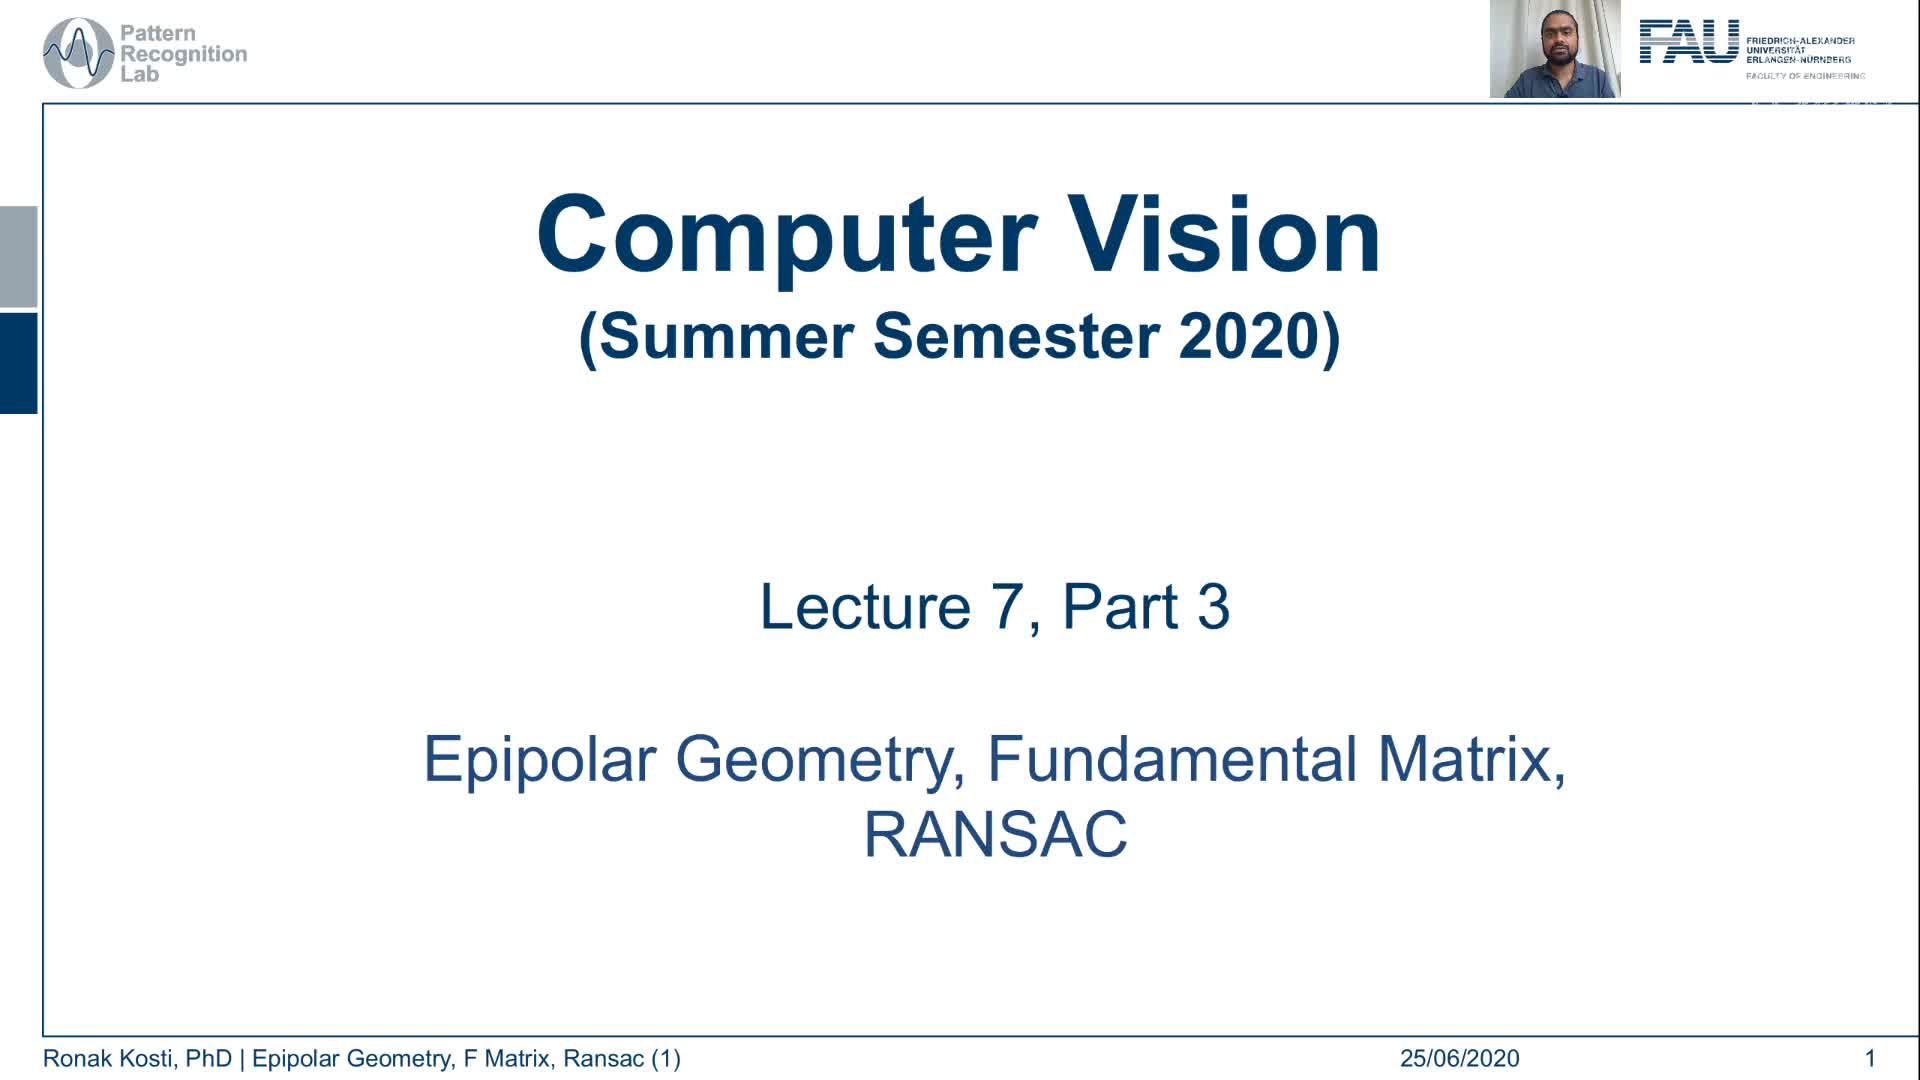 (Lecture 7, Part 3) Epipolar Geometry and Ransac preview image